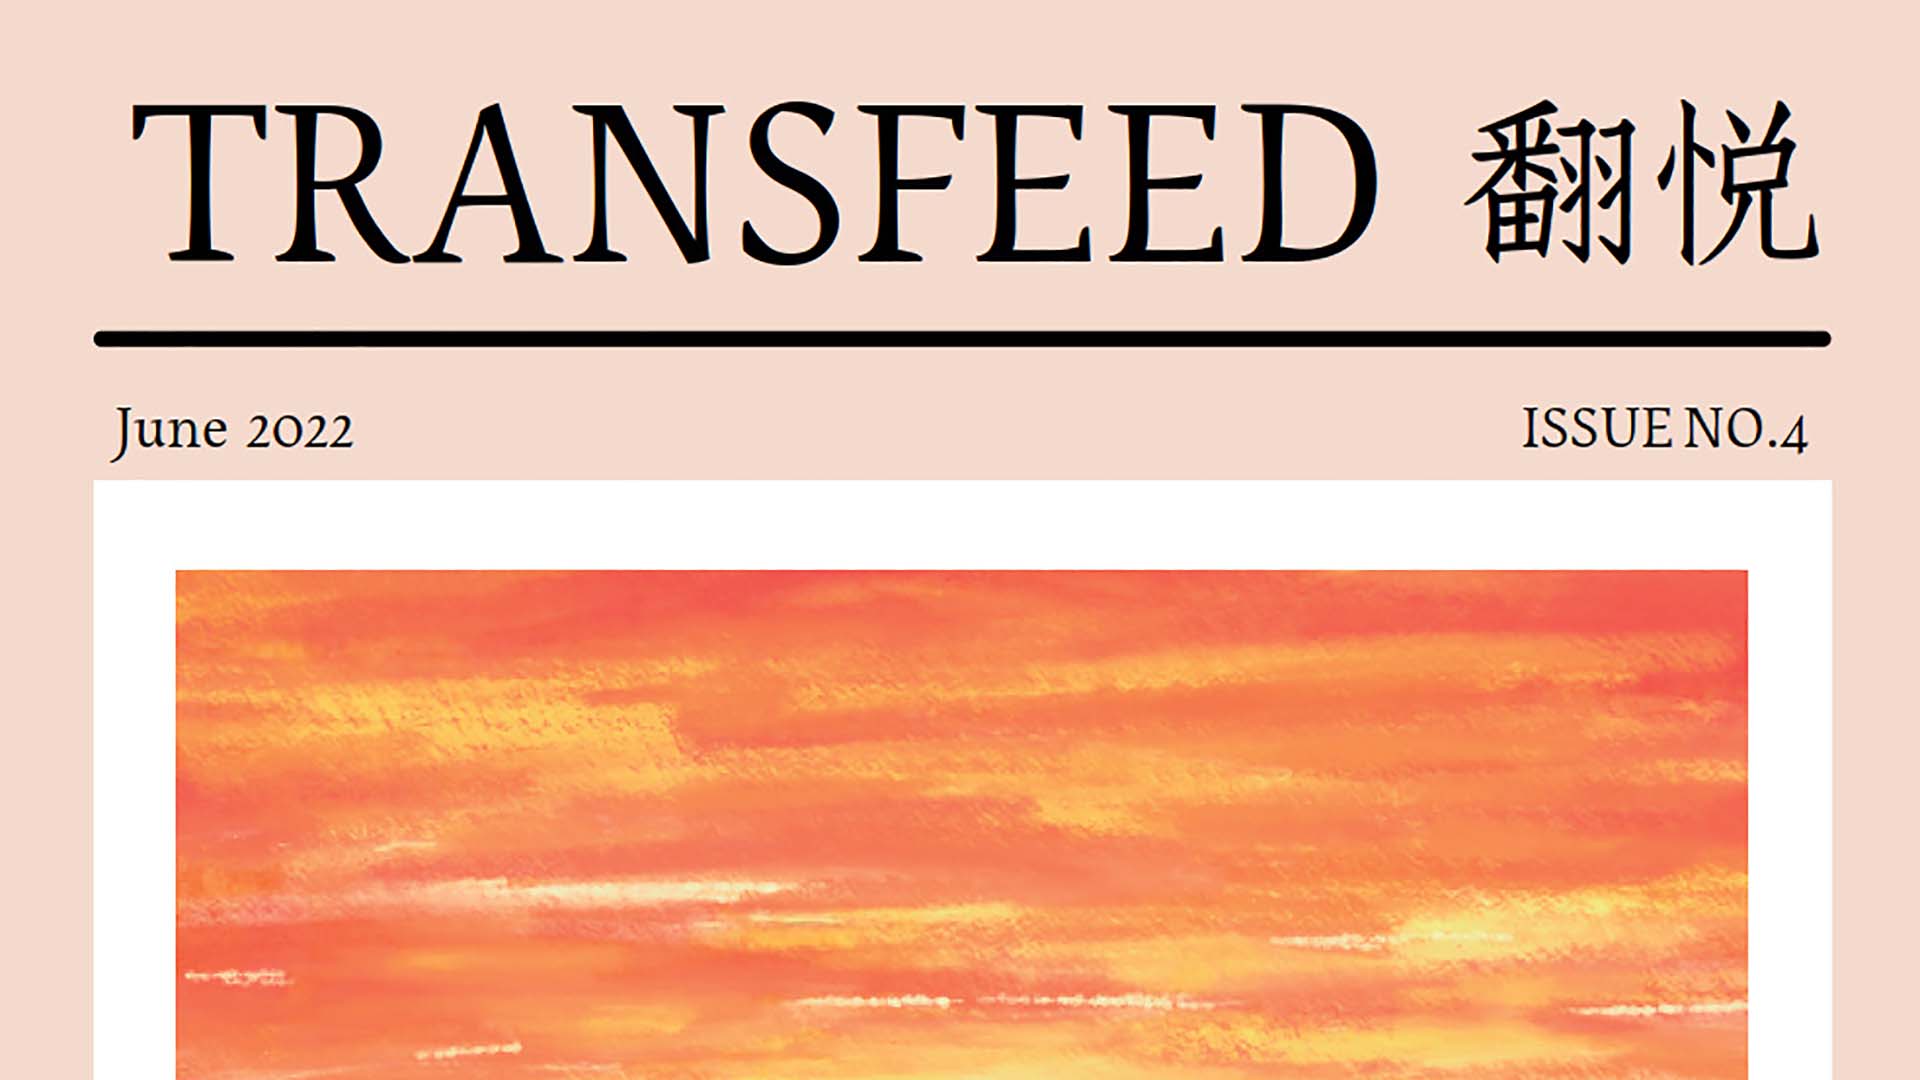 TransFeed (issue 4)